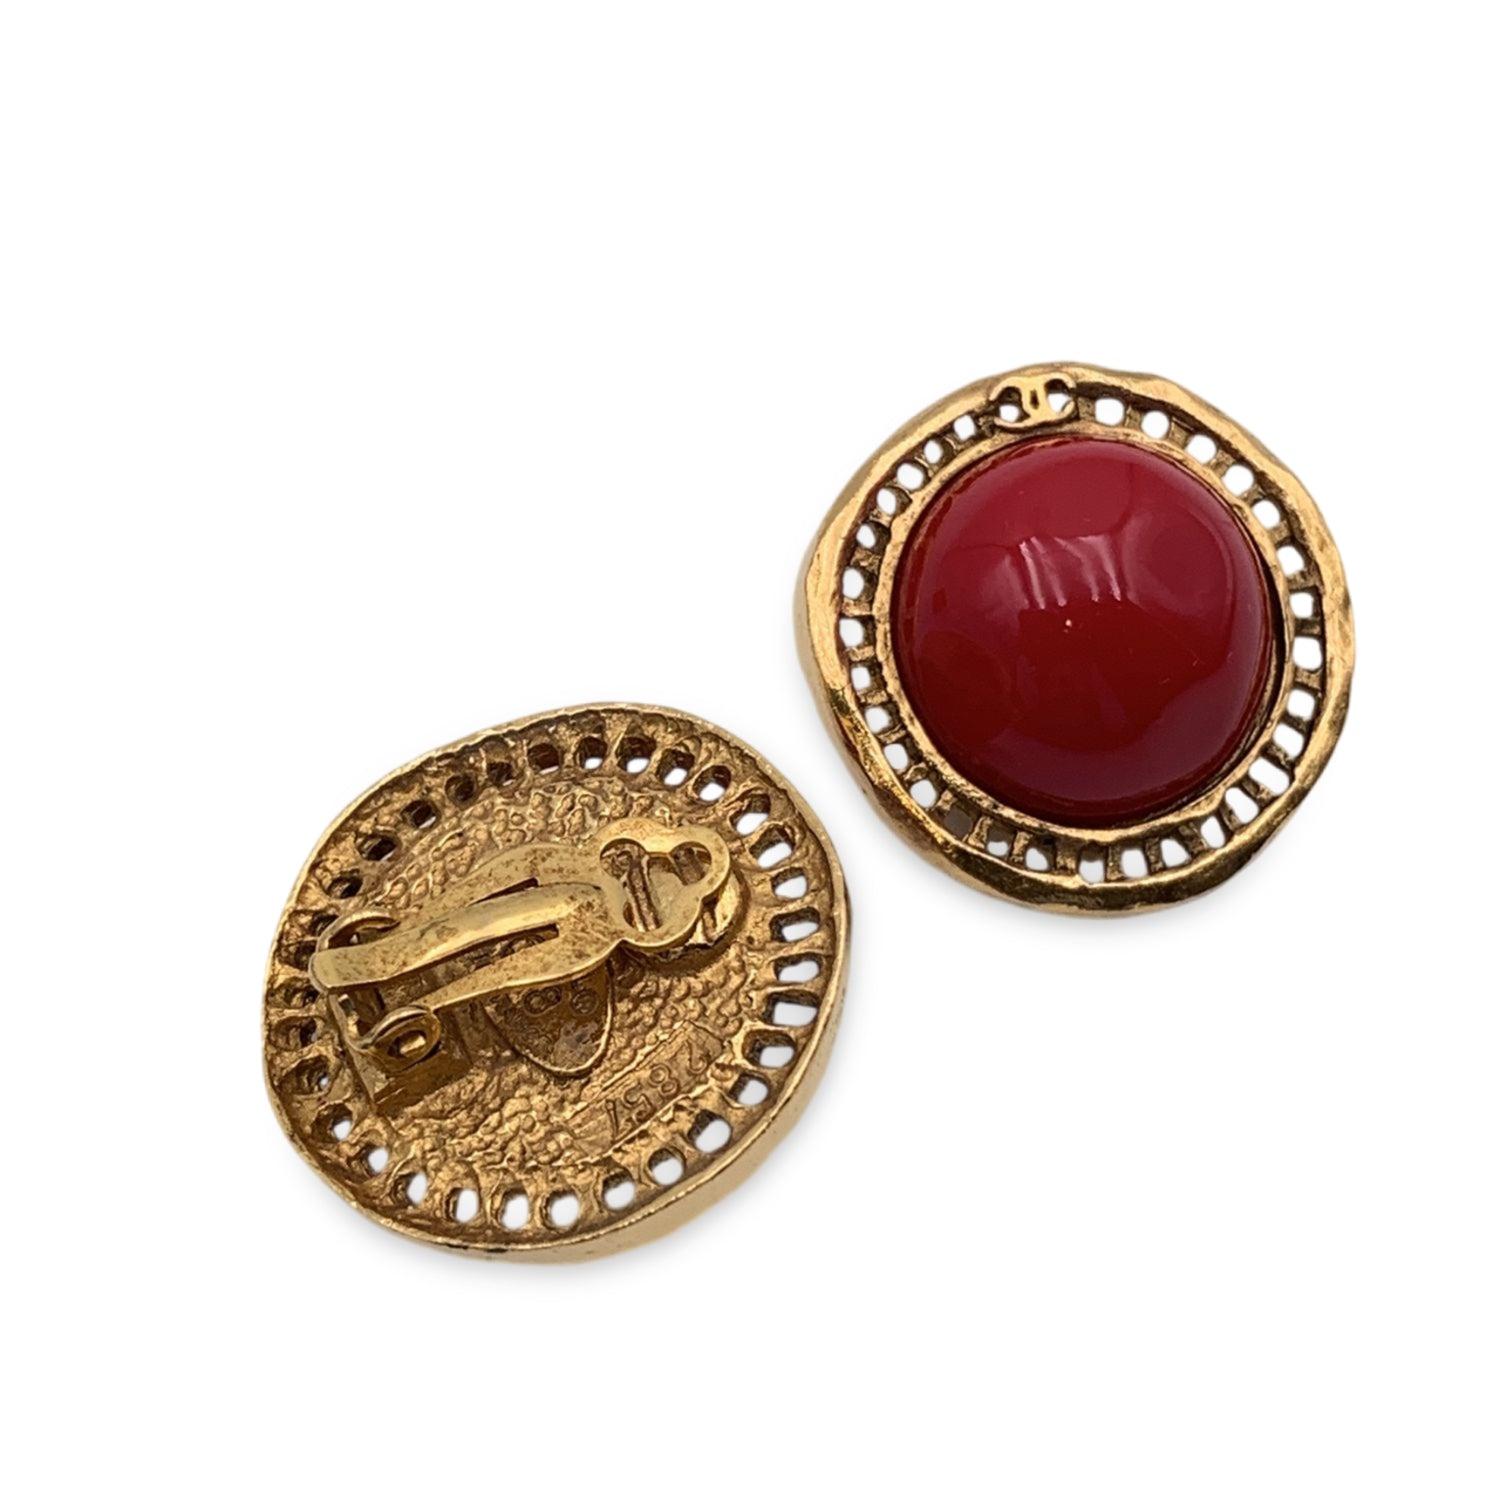 Vintage Chanel red cabochon and gold metal round frame. Signed 'Chanel - 2 CC 8 - Made in France' oval hallmark on the reverse of the earring. Measures 1 inch wide. Condition A - EXCELLENT Gently used. No other visible wear or defect. Details